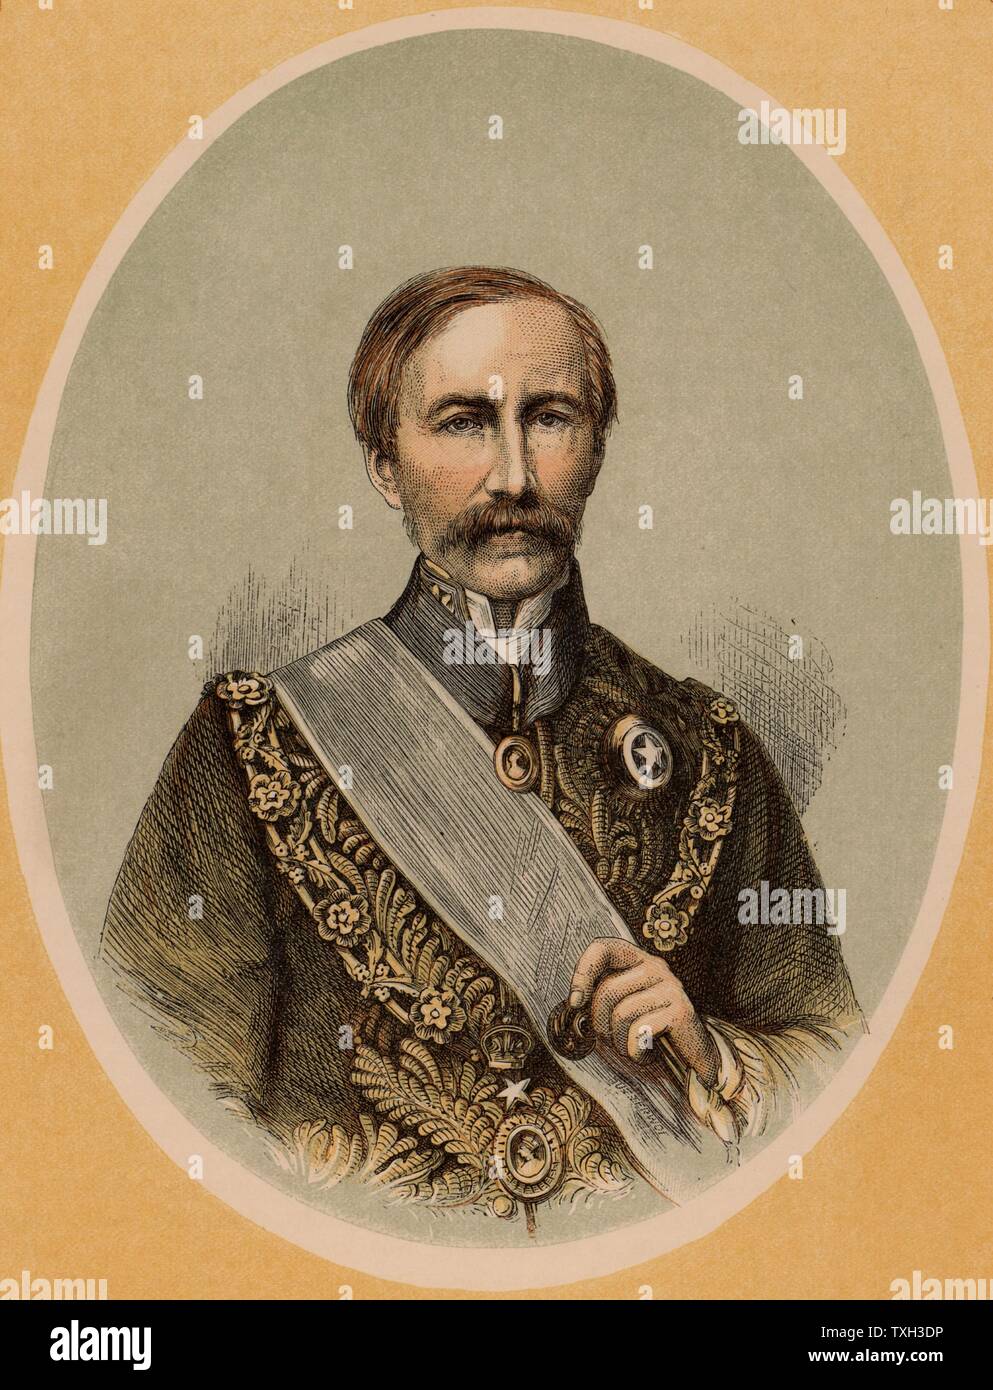 (Henry) Bartle (Edward) Frere (1815-84) British colonial administrator, born at Clydach, Breckonshire, Wales. Governor of Bombay (Mumbai) 1862-1867. Appointed governor of the Cape and High Commissioner in South Africa in 1877, recalled in 1880 because of his treatment of the Zulus.  Colour-printed wood engraving. Stock Photo